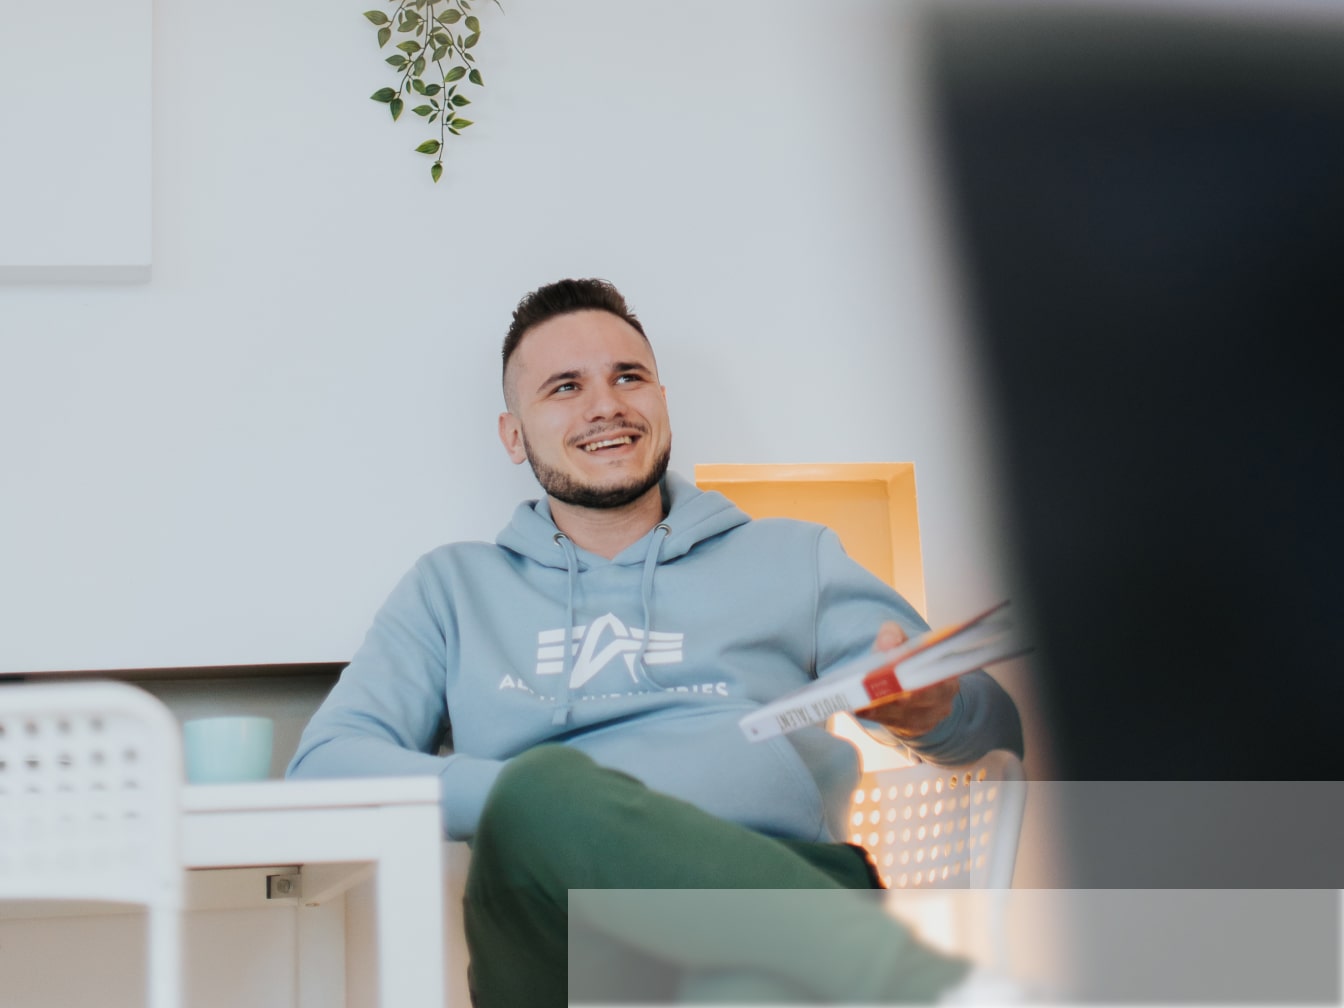 A smiling man sitting in an office lounge and holding a book